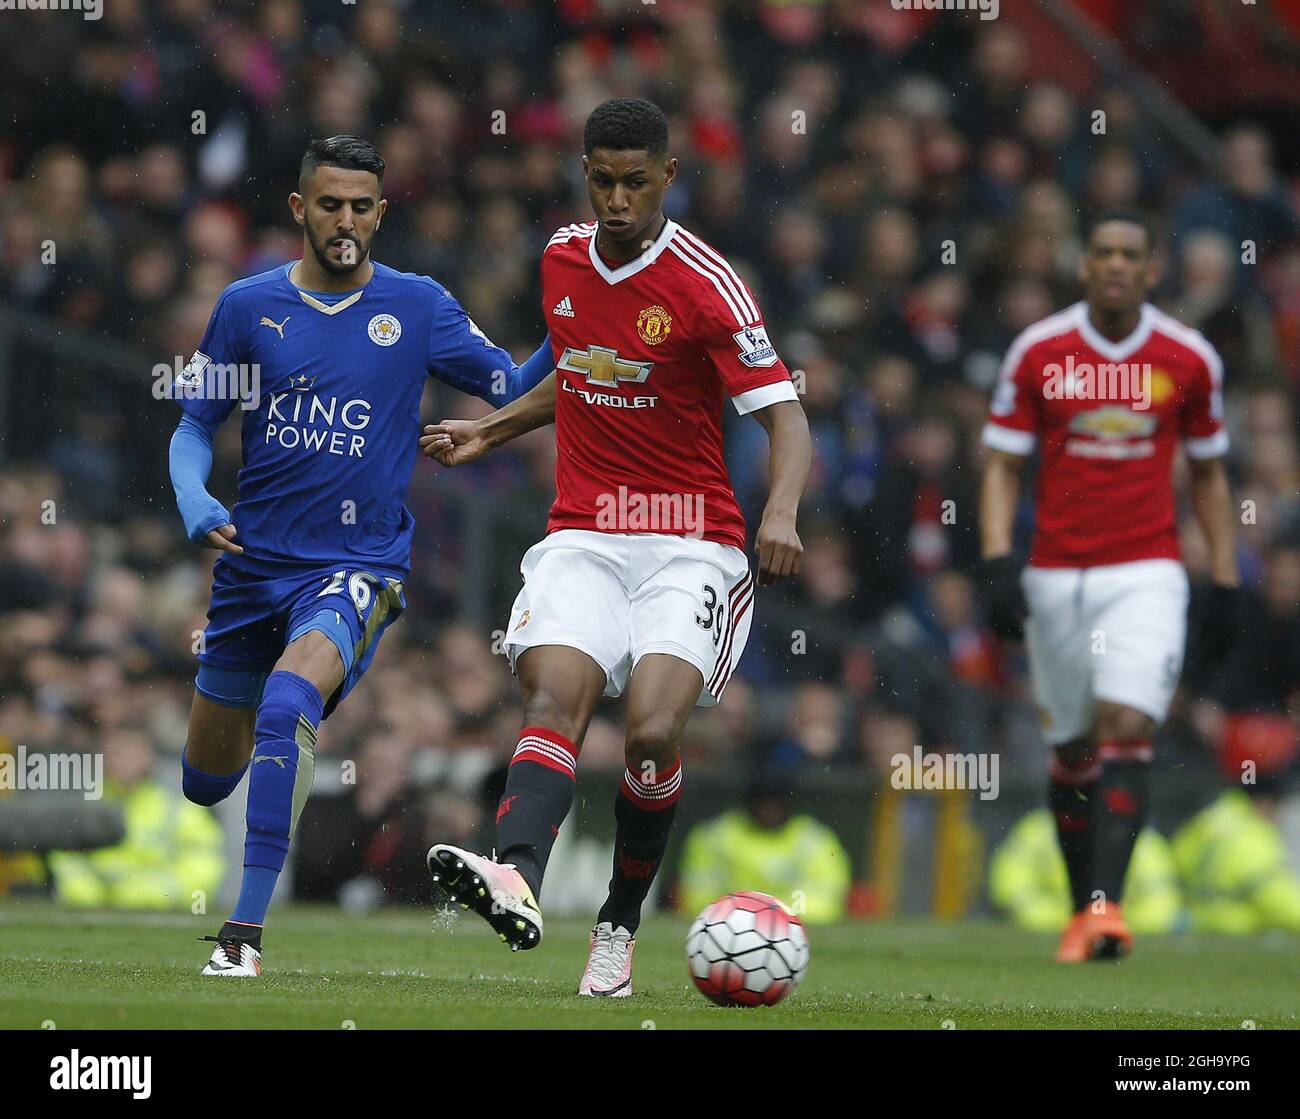 Marcus Rashford of Manchester United tussles with Riyad Mahrez of Leicester City during the Barclays Premier League match at the Old Trafford Stadium. Photo credit should read: Simon Bellis/Sportimage via PA Images                                - Newcastle Utd vs Tottenham - St James' Park Stadium - Newcastle Upon Tyne - England - 19th April 2015 - Picture Phil Oldham/Sportimage Stock Photo